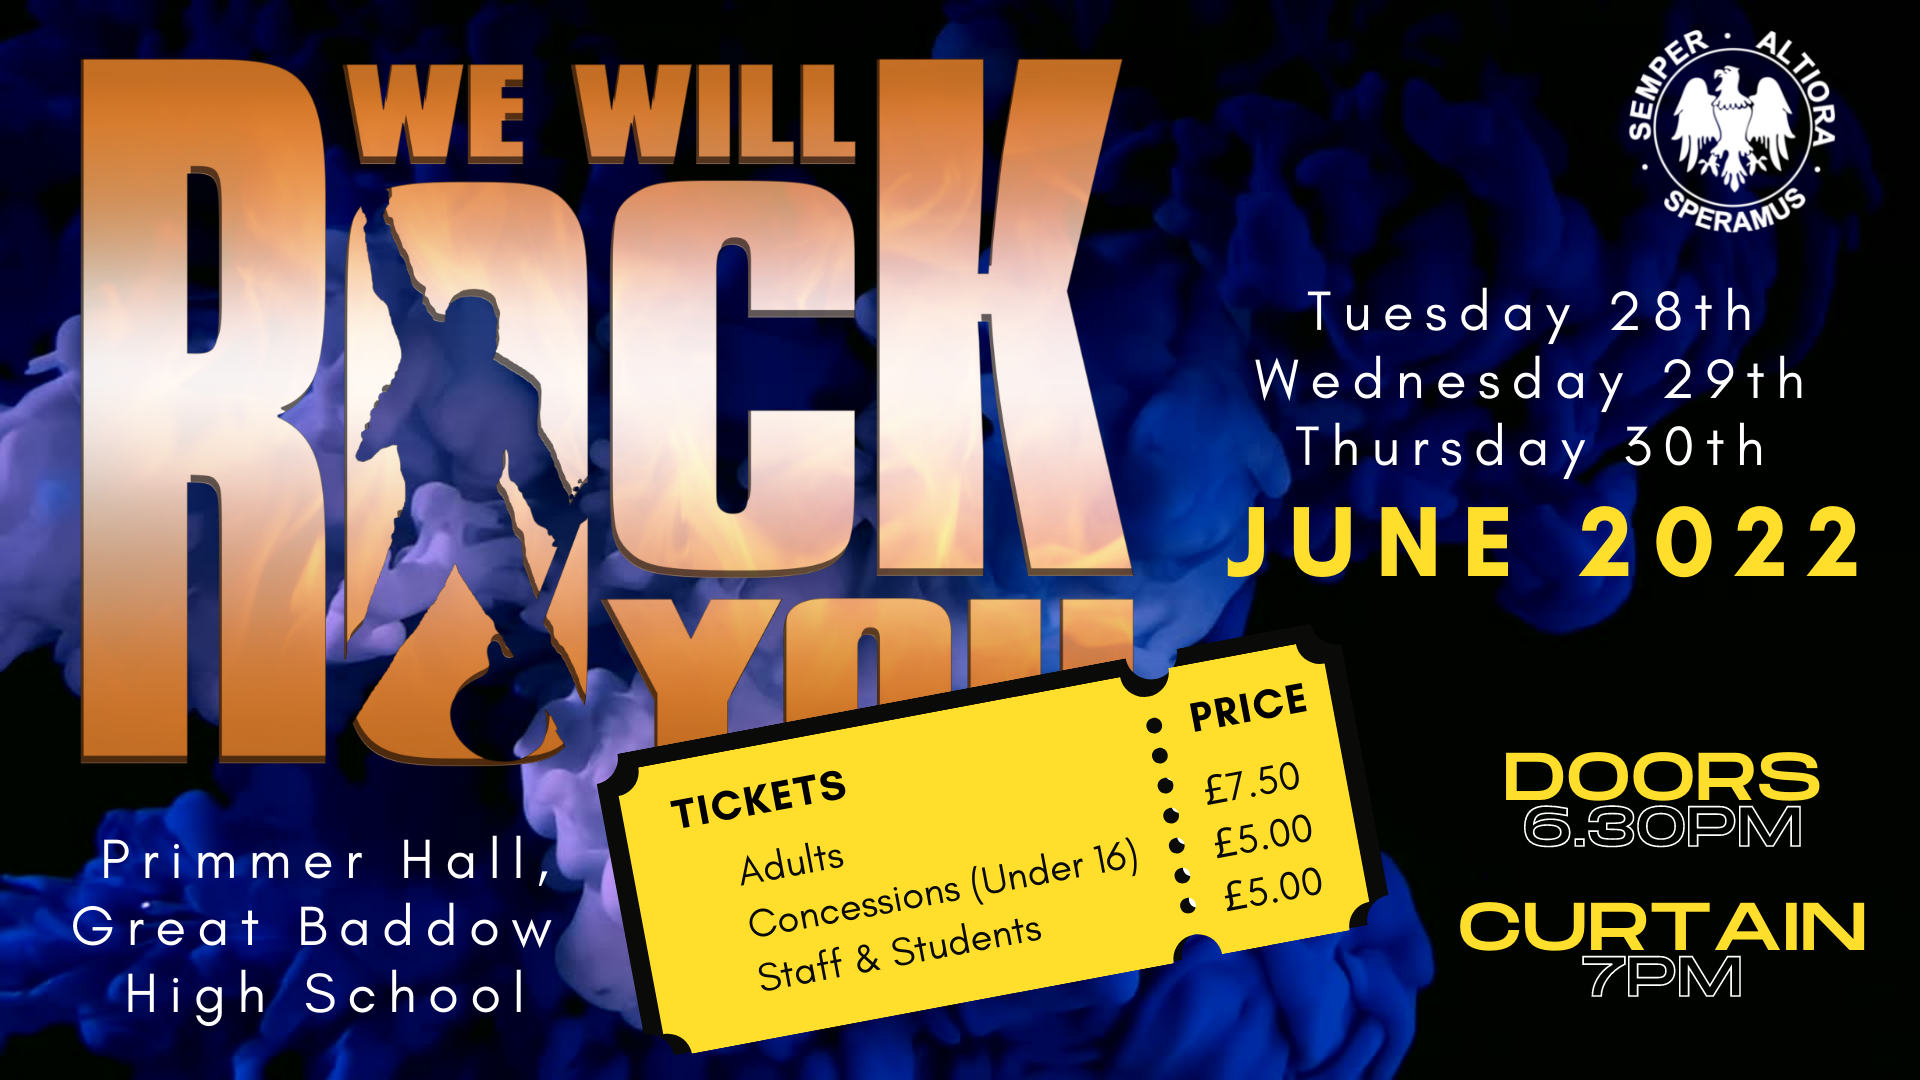 We Will Rock You Ticket Sales